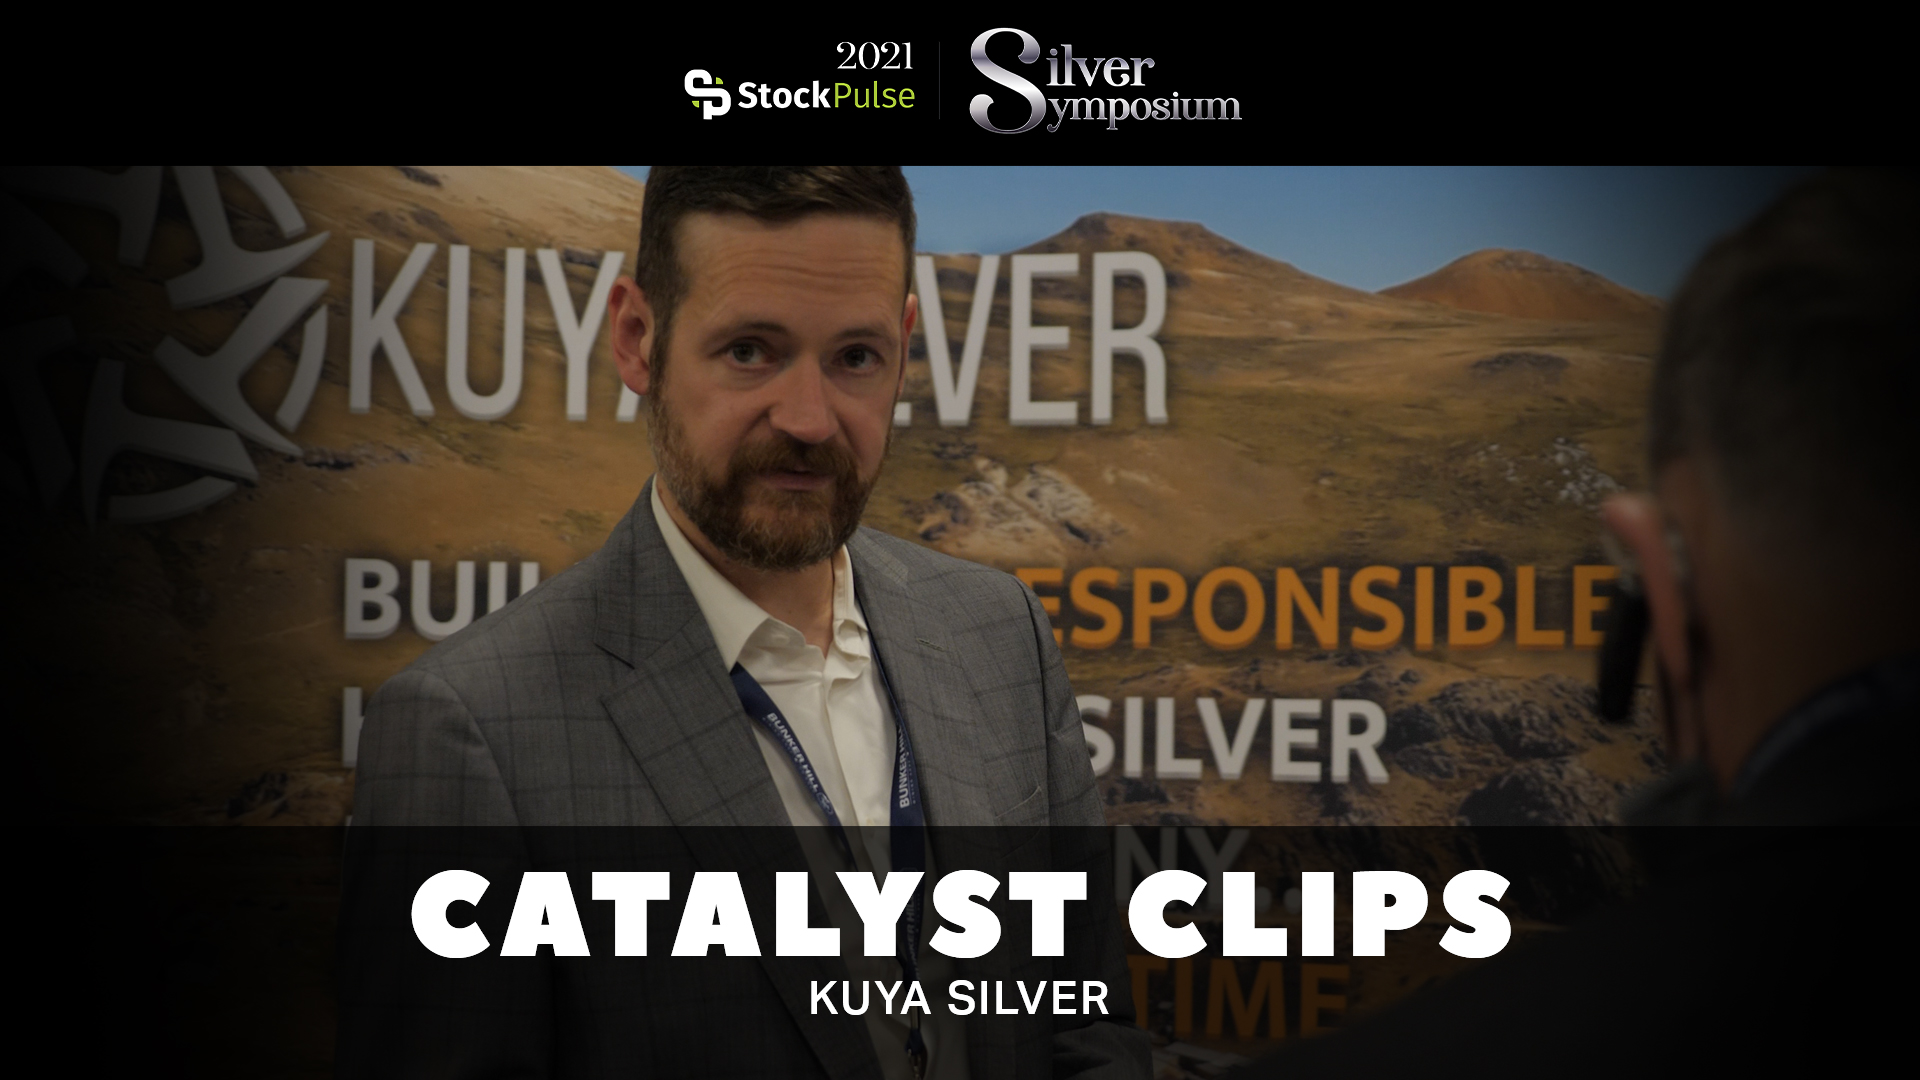 2021 StockPulse Silver Symposium Catalyst Clips | David Stein of Kuya Silver